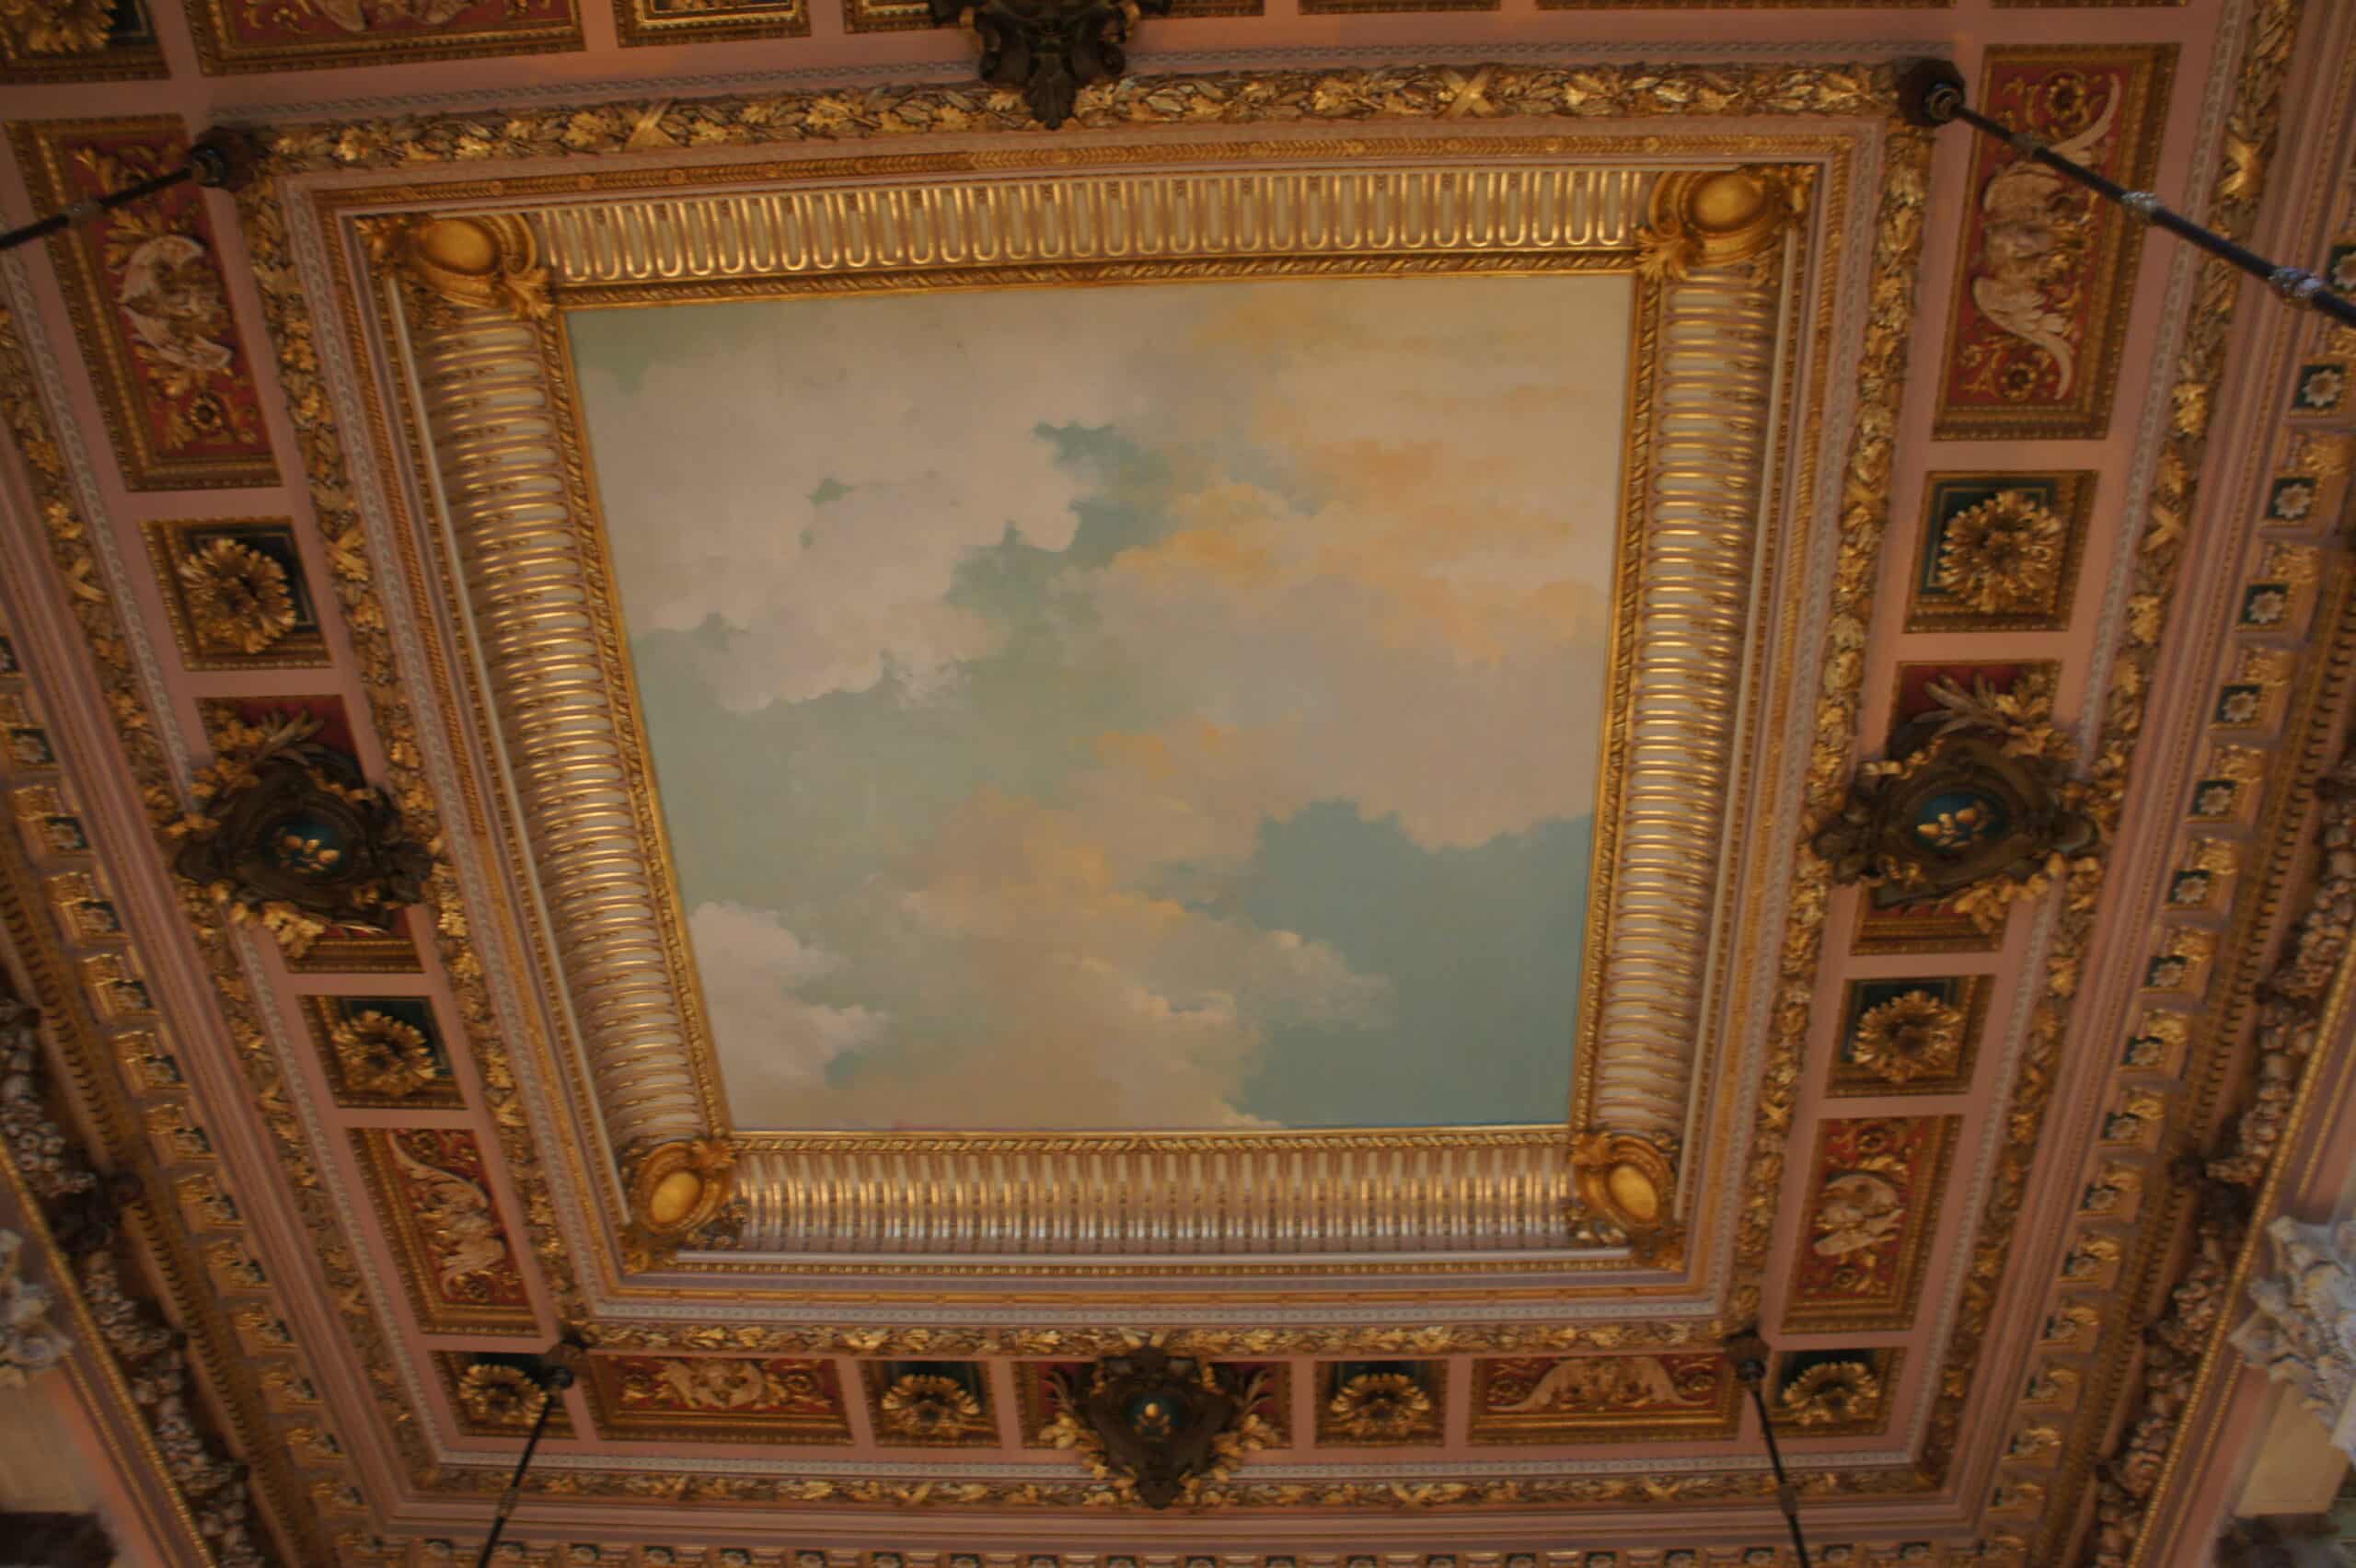 Grand Entrance Ceiling